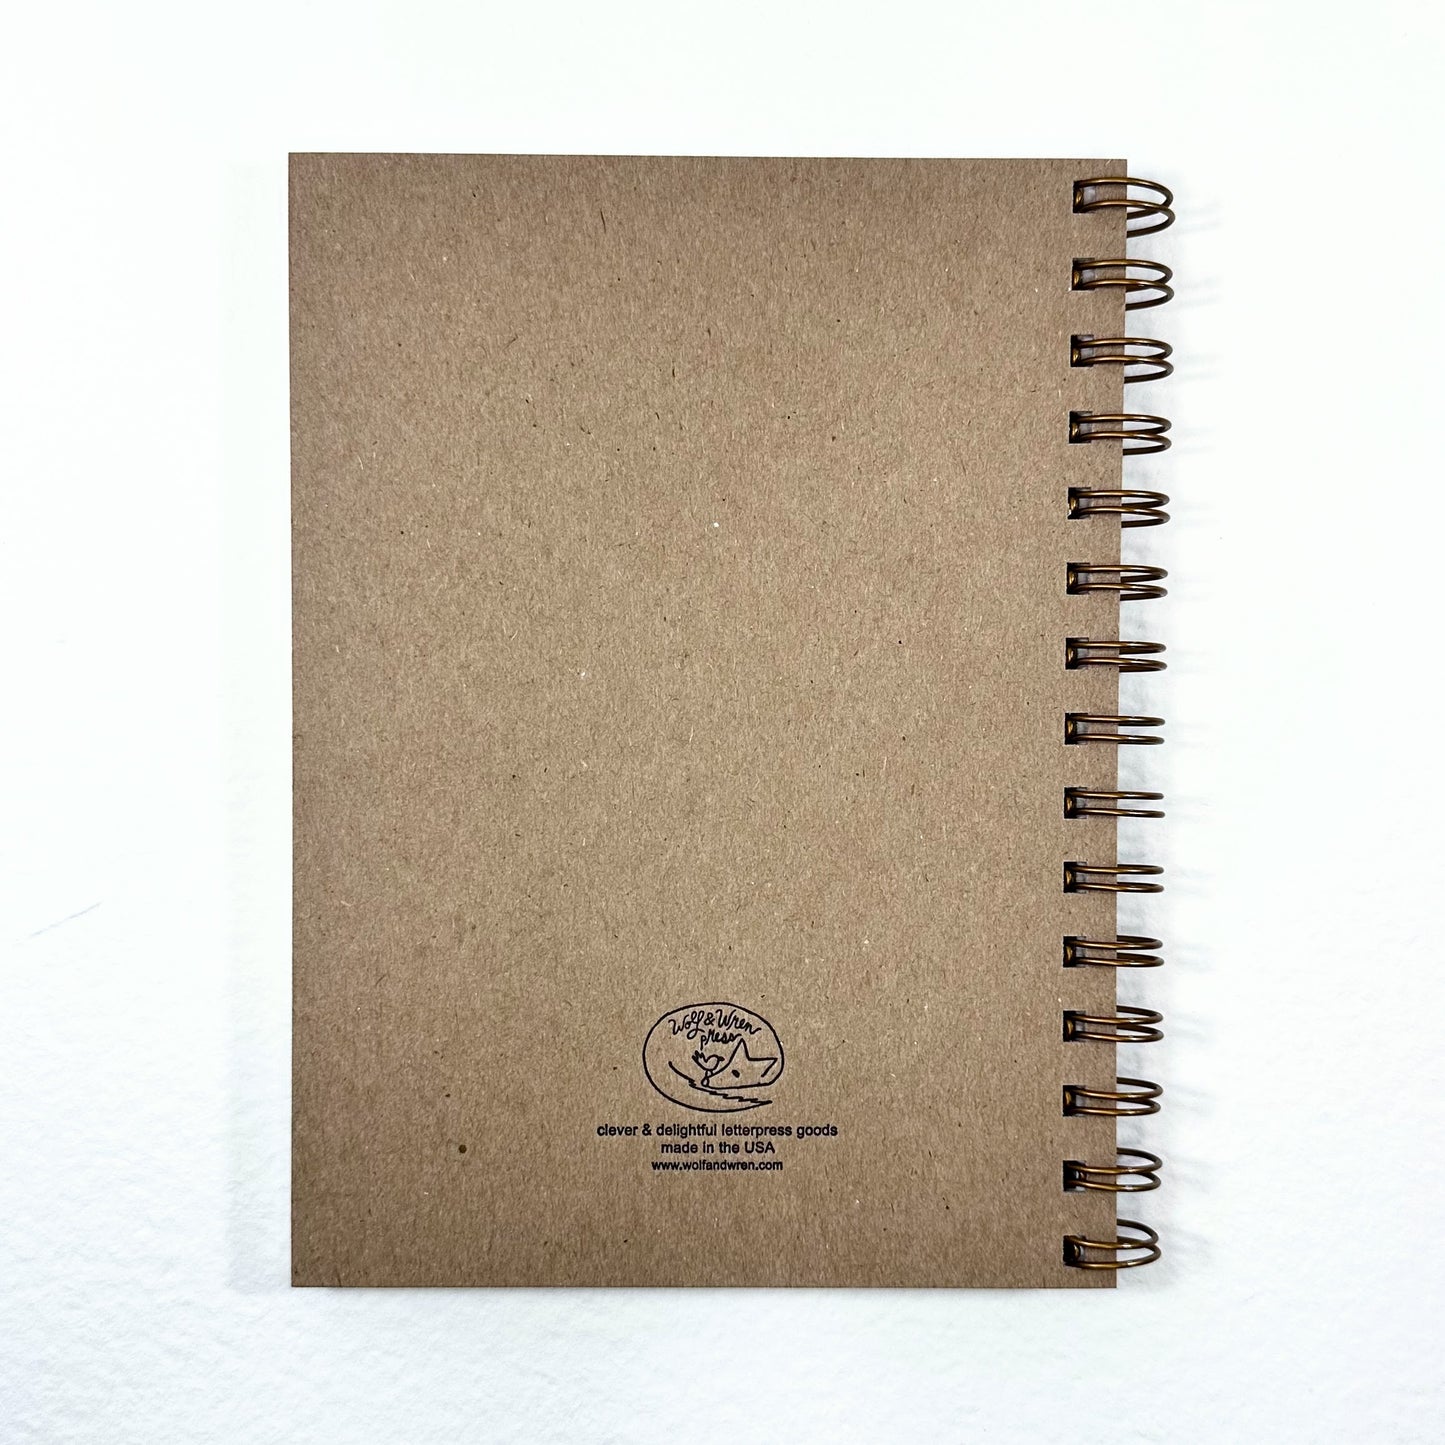 LARGE CATS NOTEBOOK